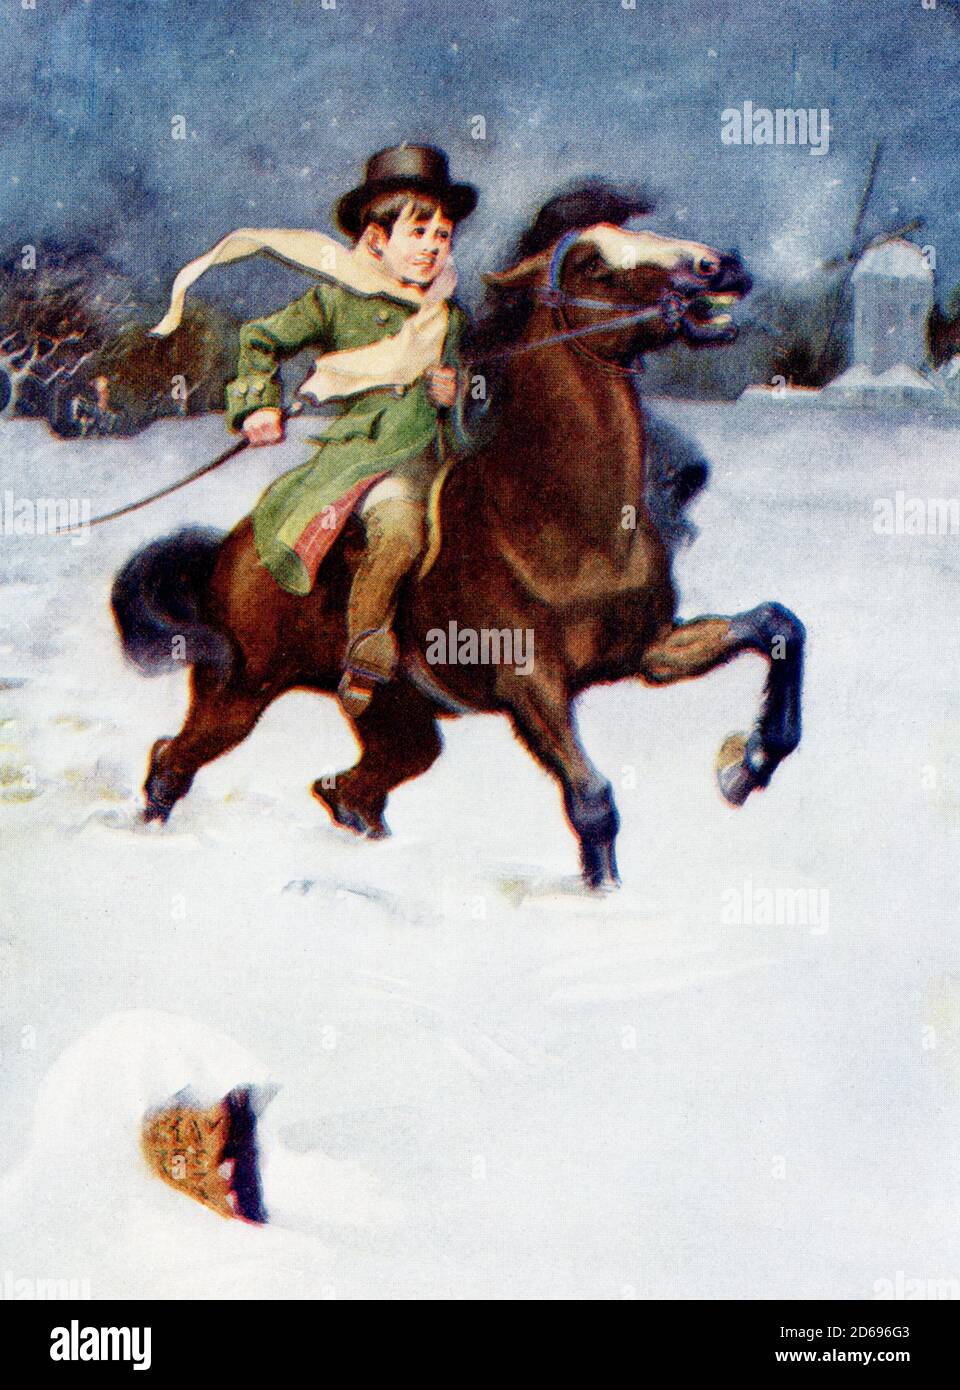 The caption of the 1917 illustration reads: Horatio Nelson and his pony struggled on riding to school. Nelson was born in 1758 in Norfolk, England. At the Battle of Trafalgar in 1805 (part of the Napoleonic Wars), British Admiral Horatio Nelson was aboard the vessel Victory, whose Captain was Thomas Hardy. Nelson struck by a bullet that entered his left shoulder, pierced his lung, and settled at the bottom of his spine. He died soon after. The British won the battle. Stock Photo